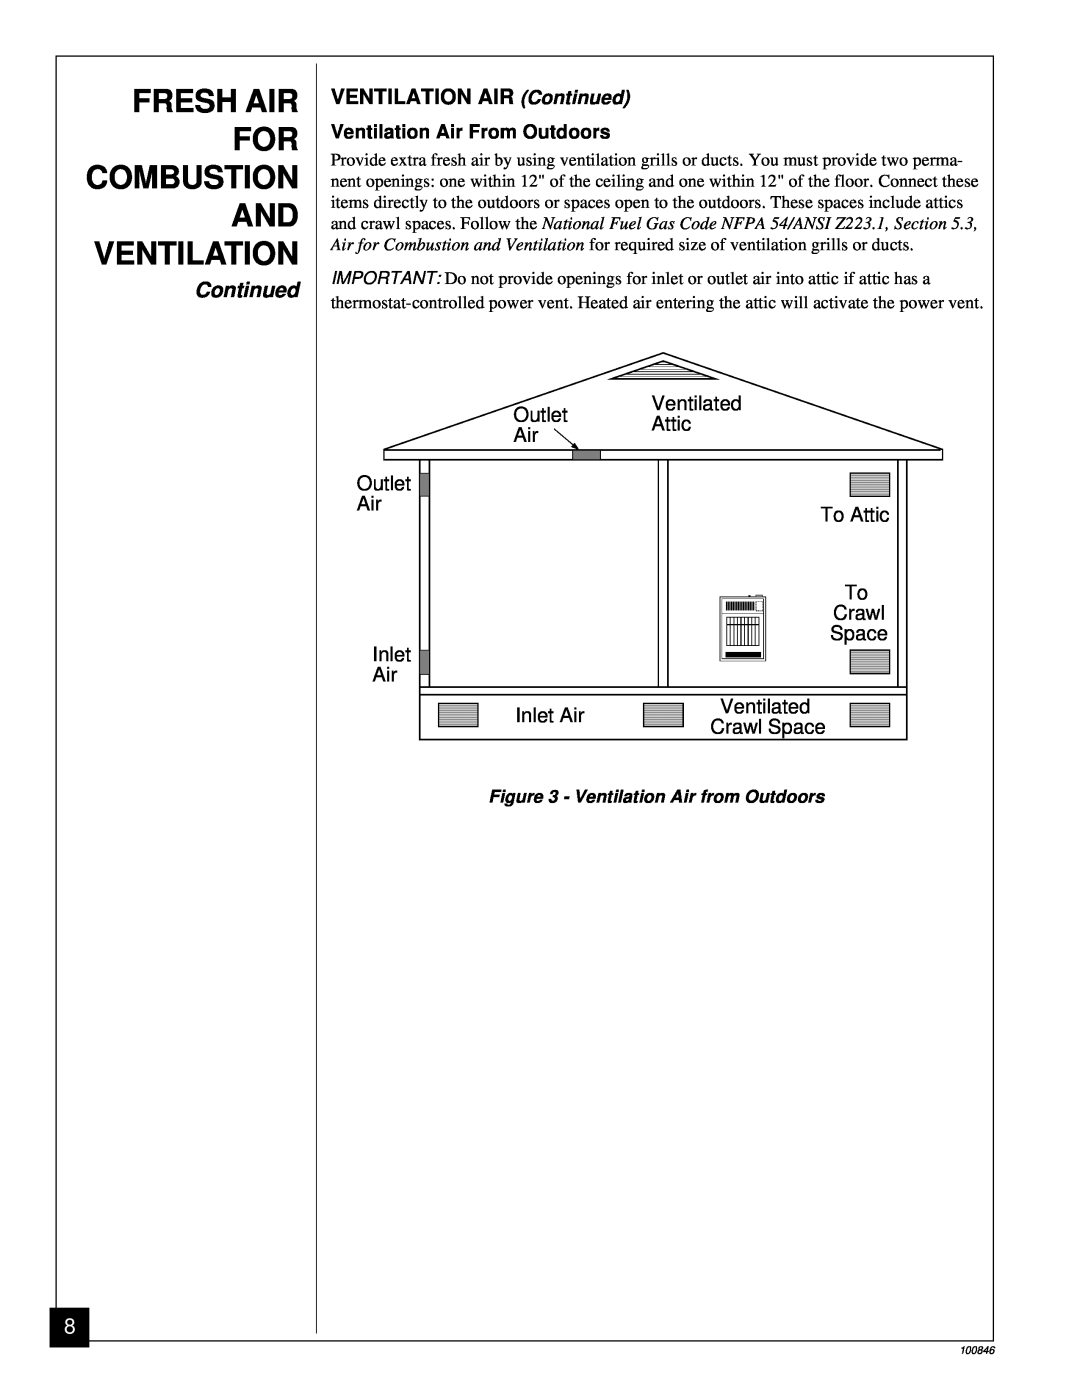 Desa CGP11A Fresh Air For Combustion And Ventilation, Continued, Ventilated Outlet Attic Air, To Attic, Inlet Air 